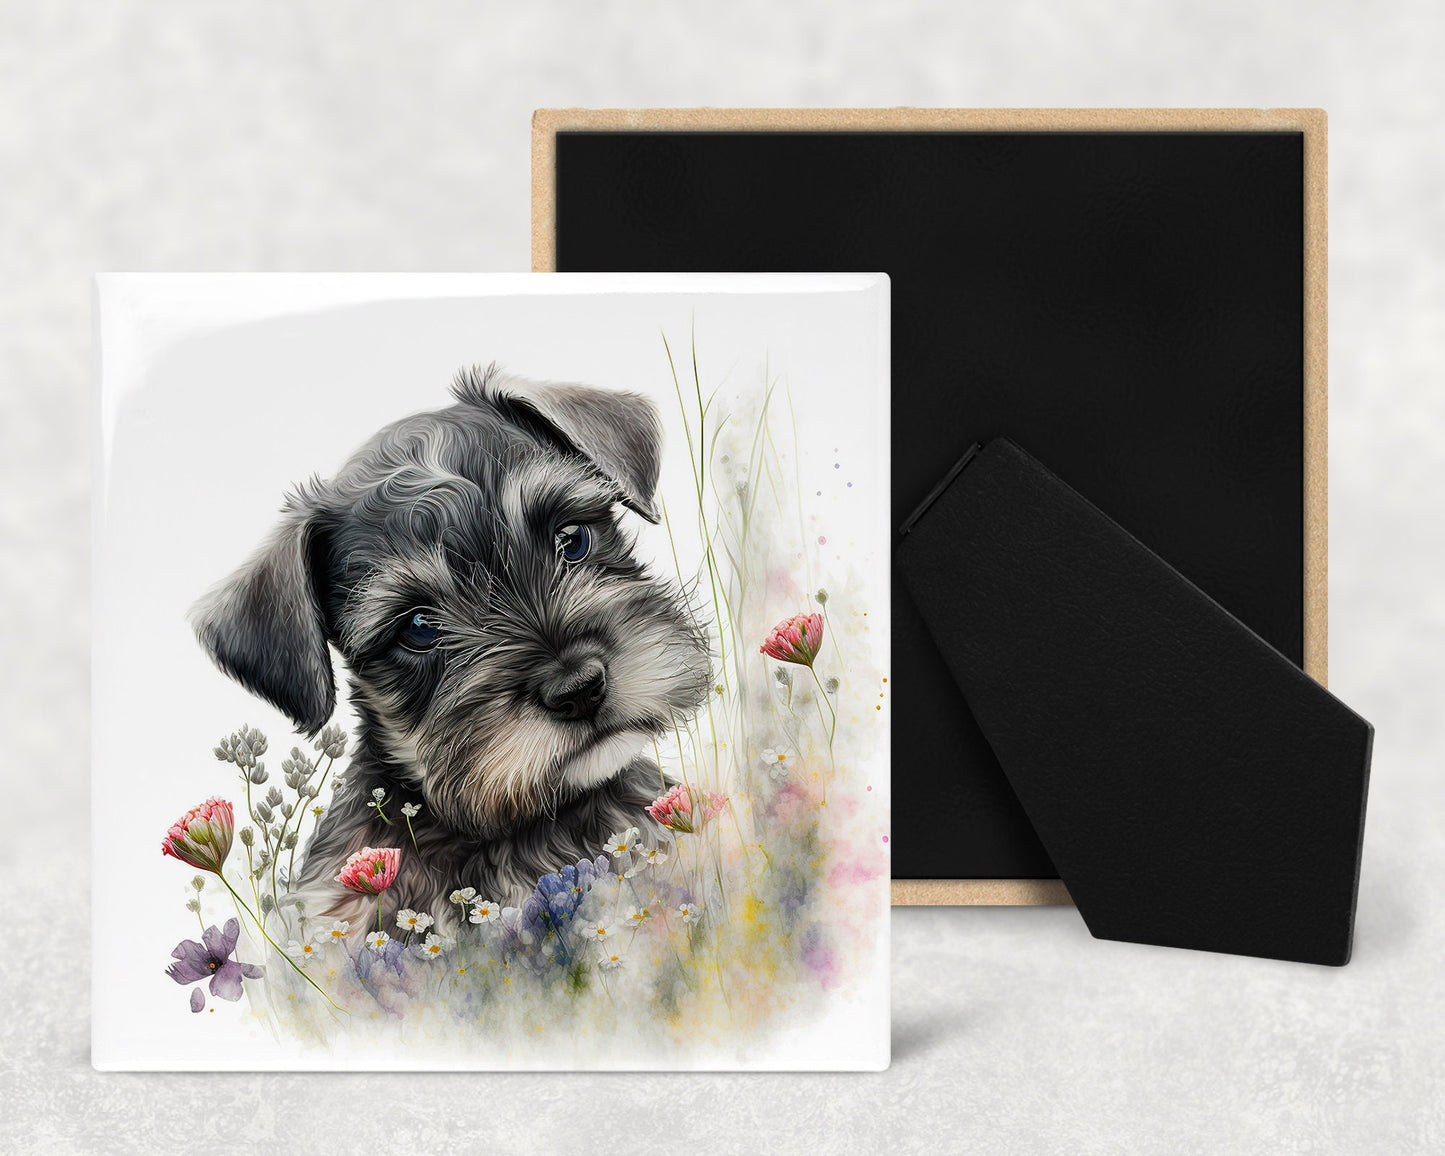 Cute Schnauzer Puppy Art Decorative Ceramic Tile Set with Optional Easel Back - Available in 4 sizes - Set of 4